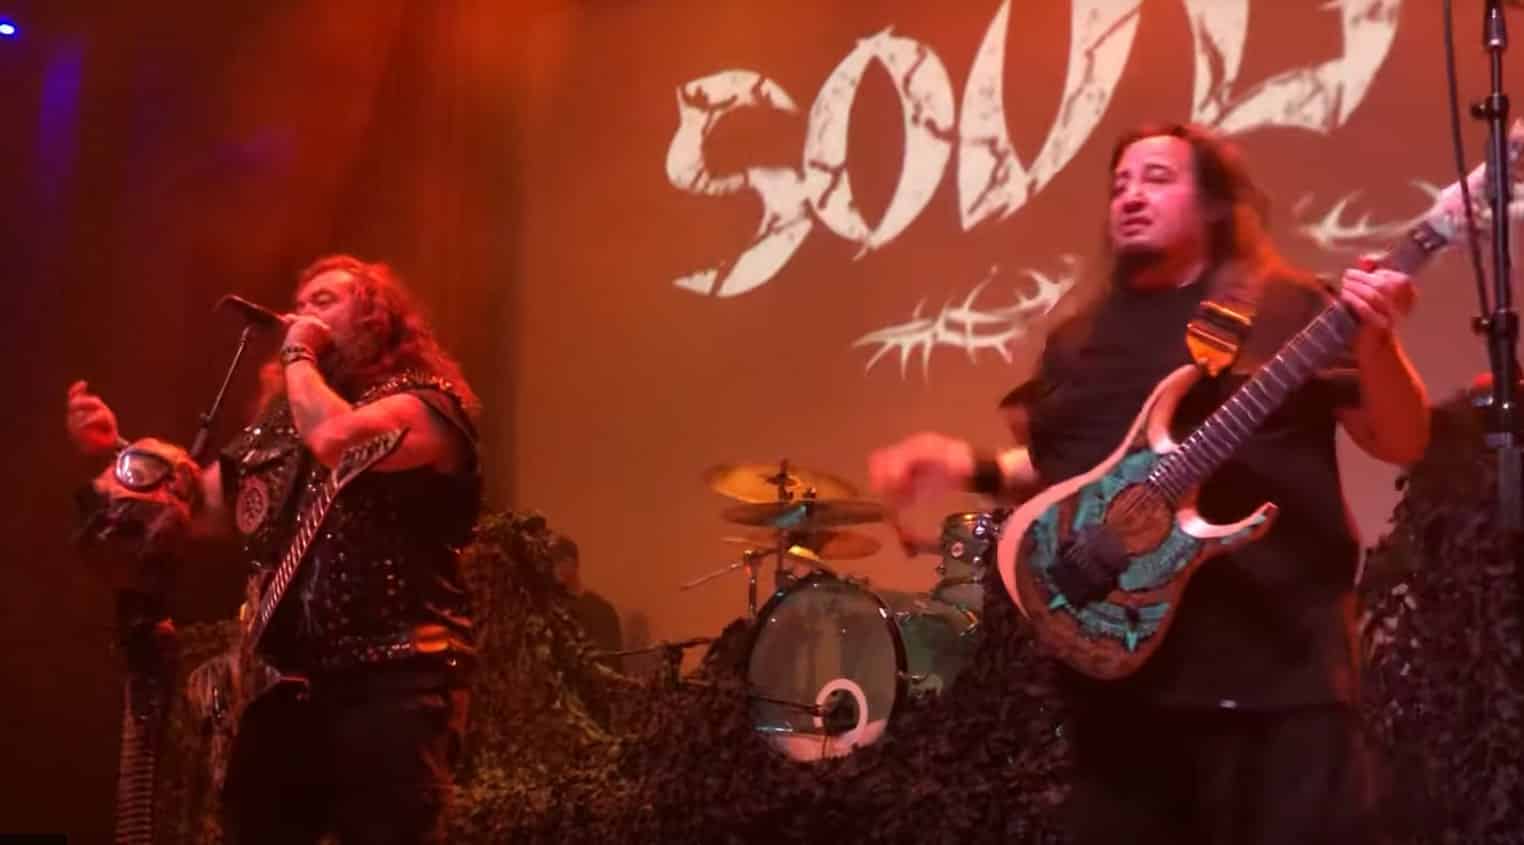 VIDEO: SOULFLY Cover FEAR FACTORY’s ‘Replica’ With DINO CAZARES On Guitar